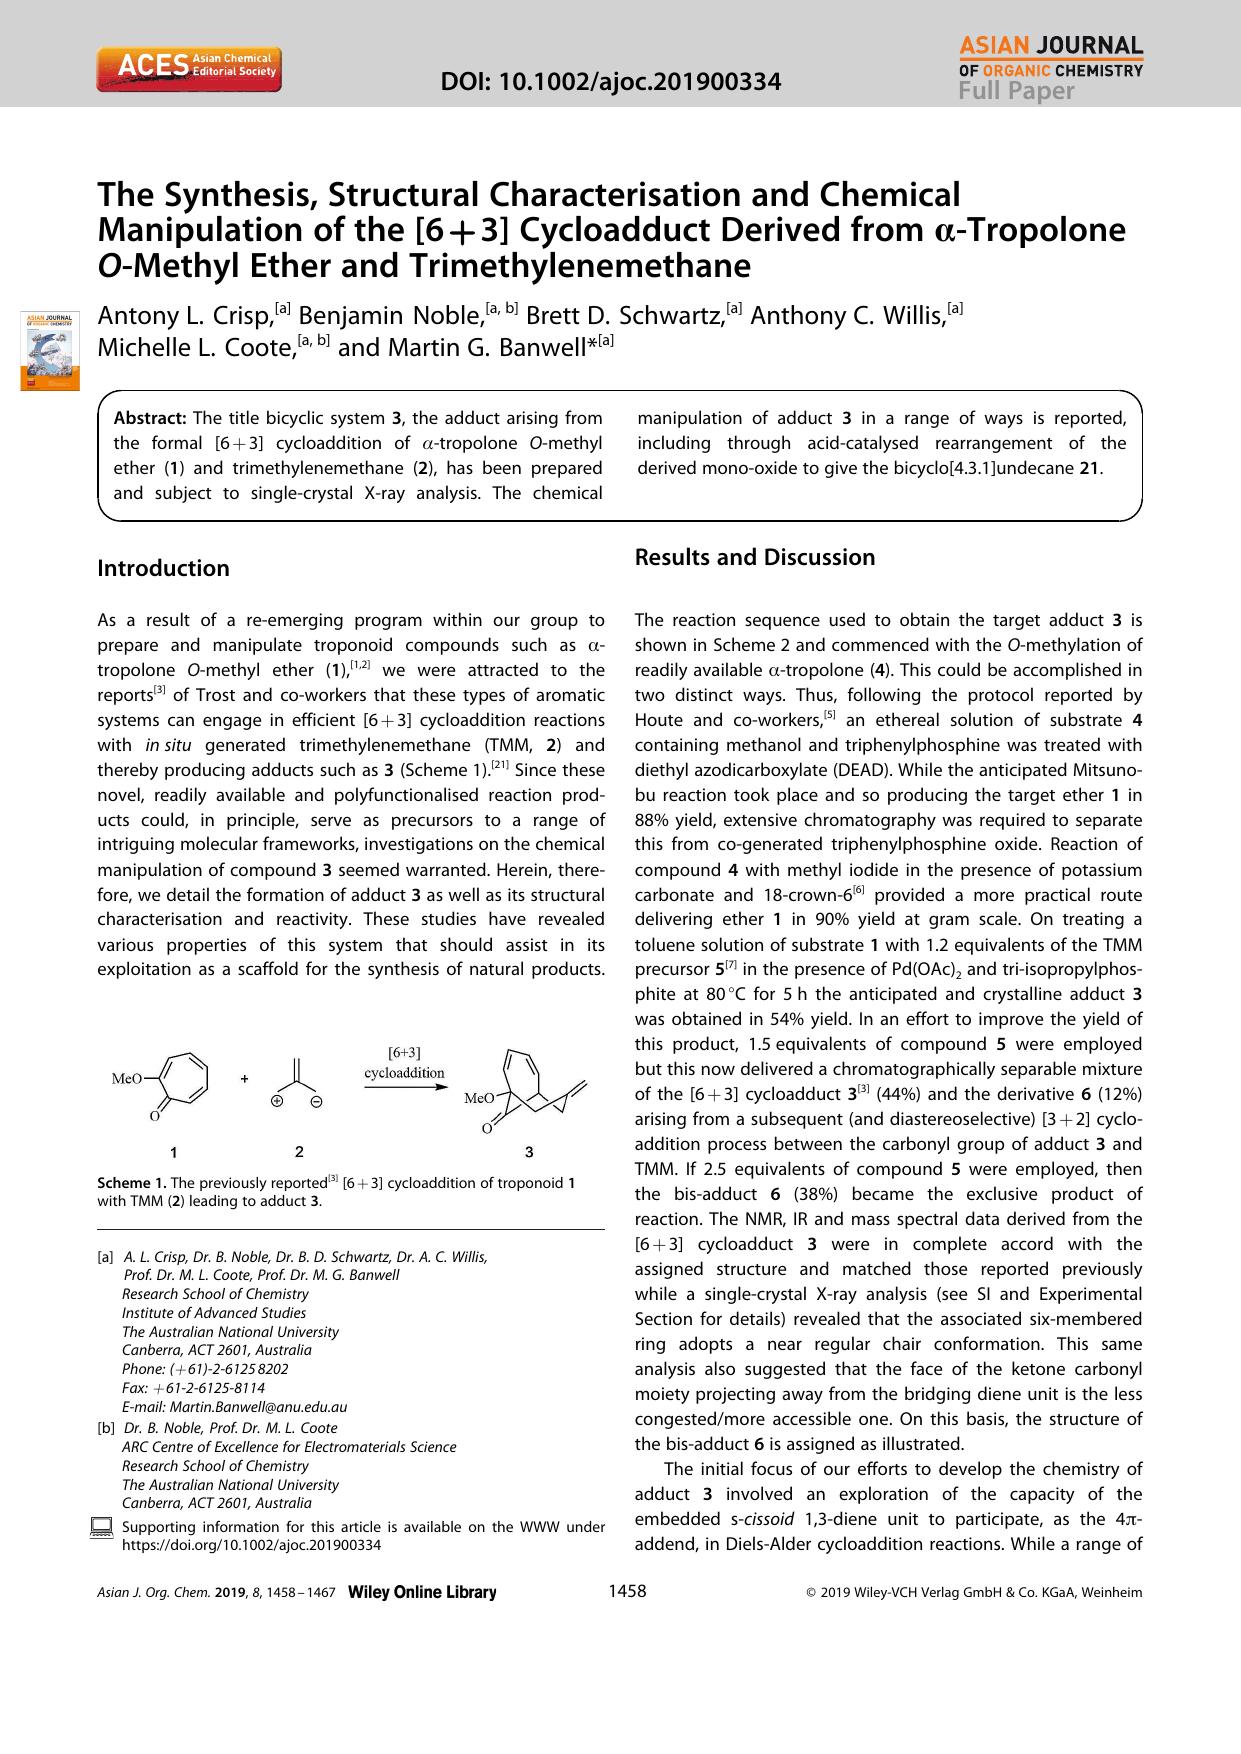 The Synthesis, Structural Characterisation and Chemical Manipulation of the [6+3] Cycloadduct Derived from Î±âTropolone OâMethyl Ether and Trimethylenemethane by Unknown